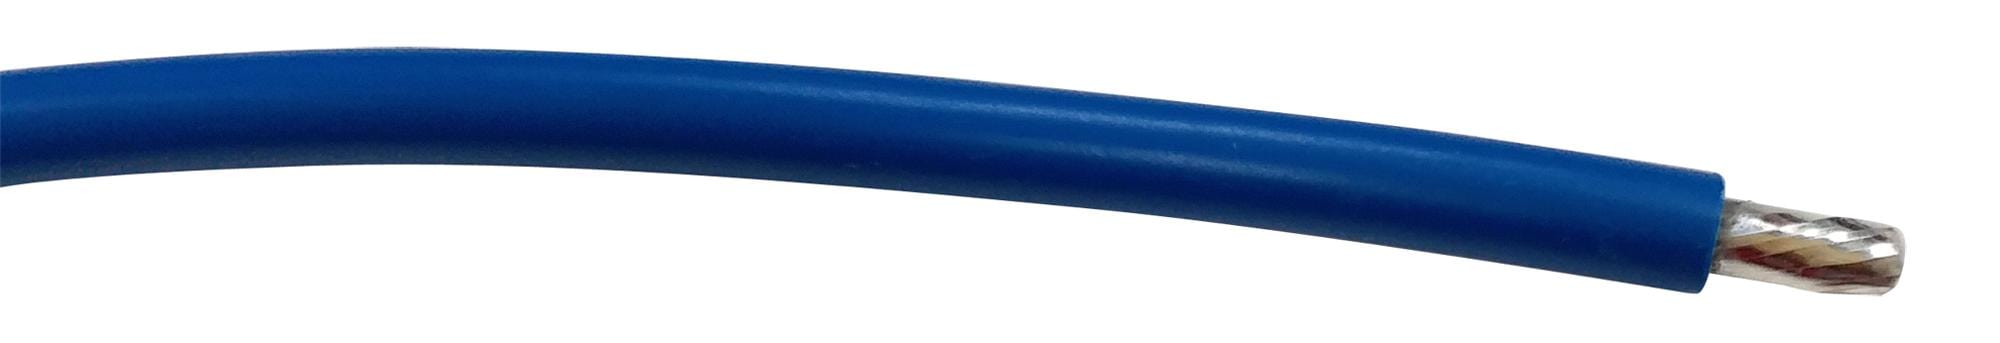 PRO POWER Single Wire PP002326 HOOK-UP WIRE, 26AWG, BLUE, 305M, 300V PRO POWER 2919485 PP002326